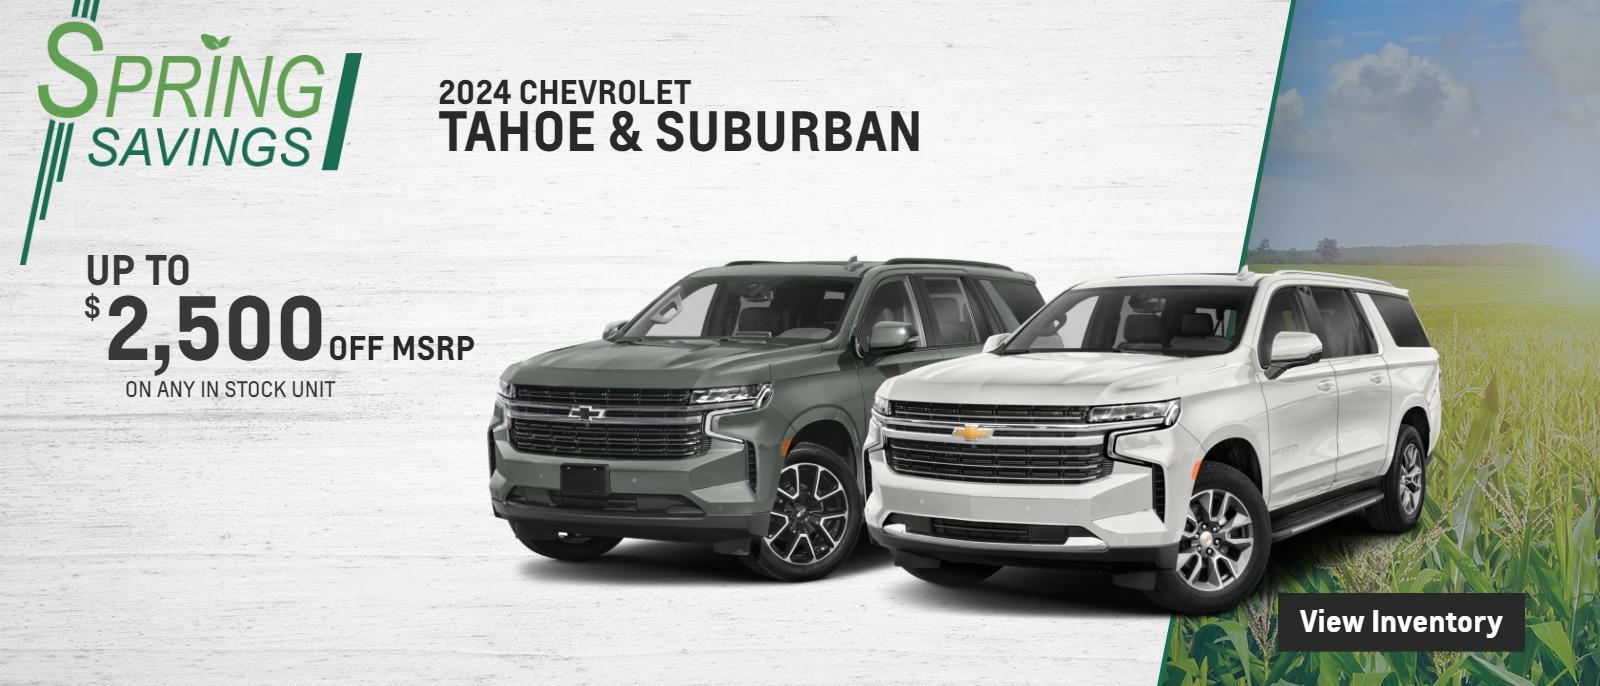 2024 TAHOE & SUBURBAN
 $2500 OFF MSRP ON ANY IN STOCK UNIT